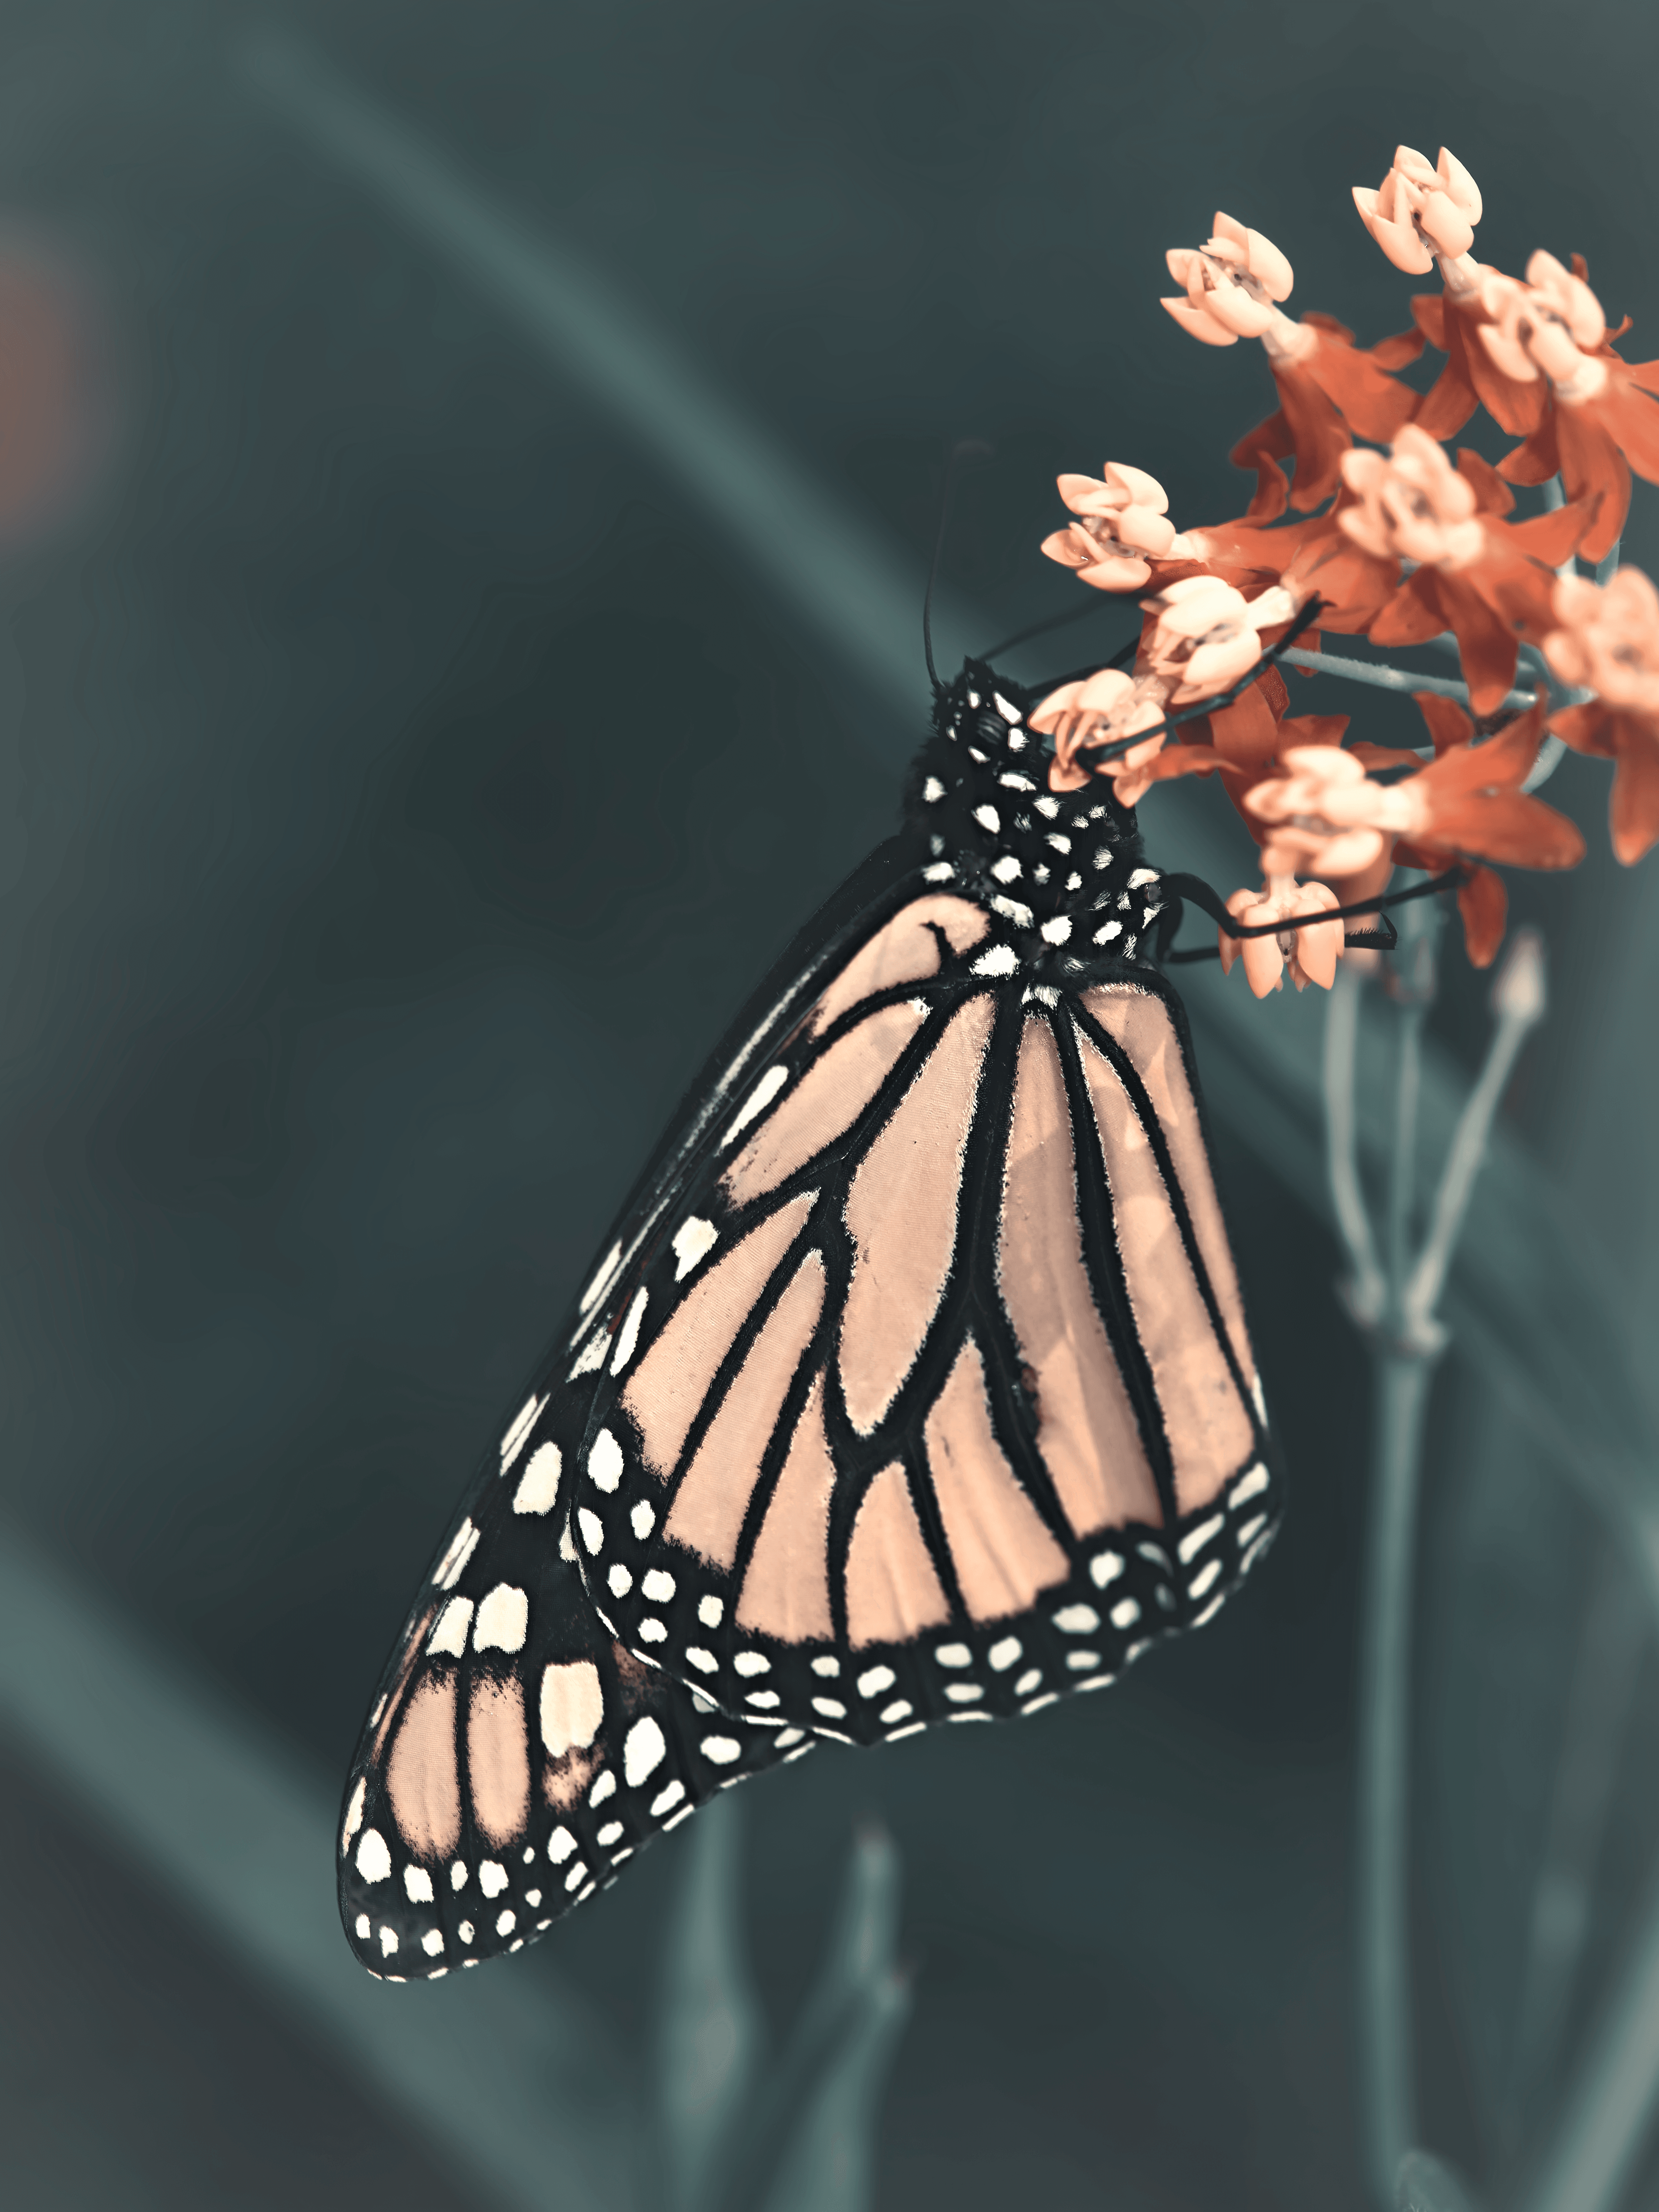 Wings of Beauty #0 - The Monarch